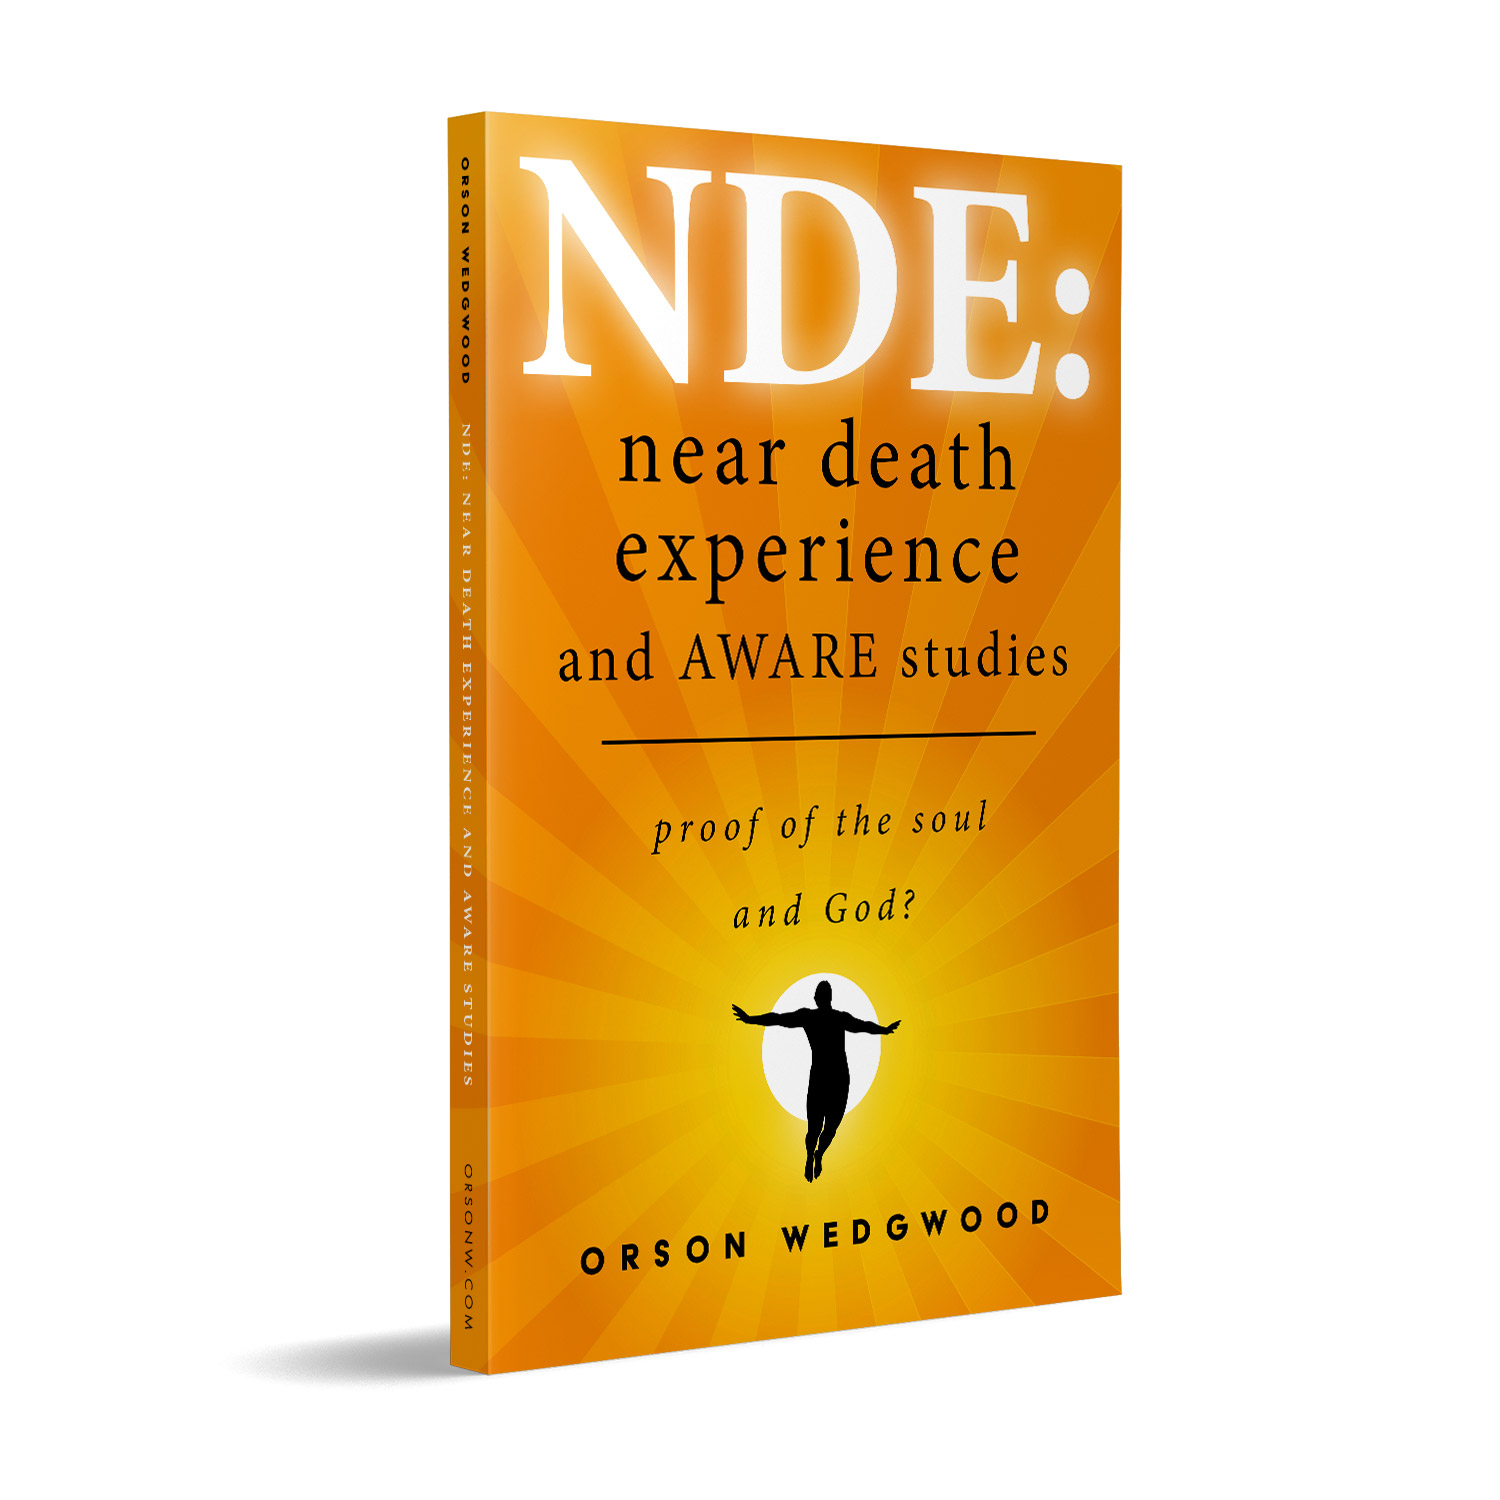 'NDE' is faith-driven scientific deep-dive on the subject of Near Death Experiences. The author is Orson Wedgwood. The book cover design and interior formatting are by Mark Thomas. To learn more about what Mark could do for your book, please visit coverness.com